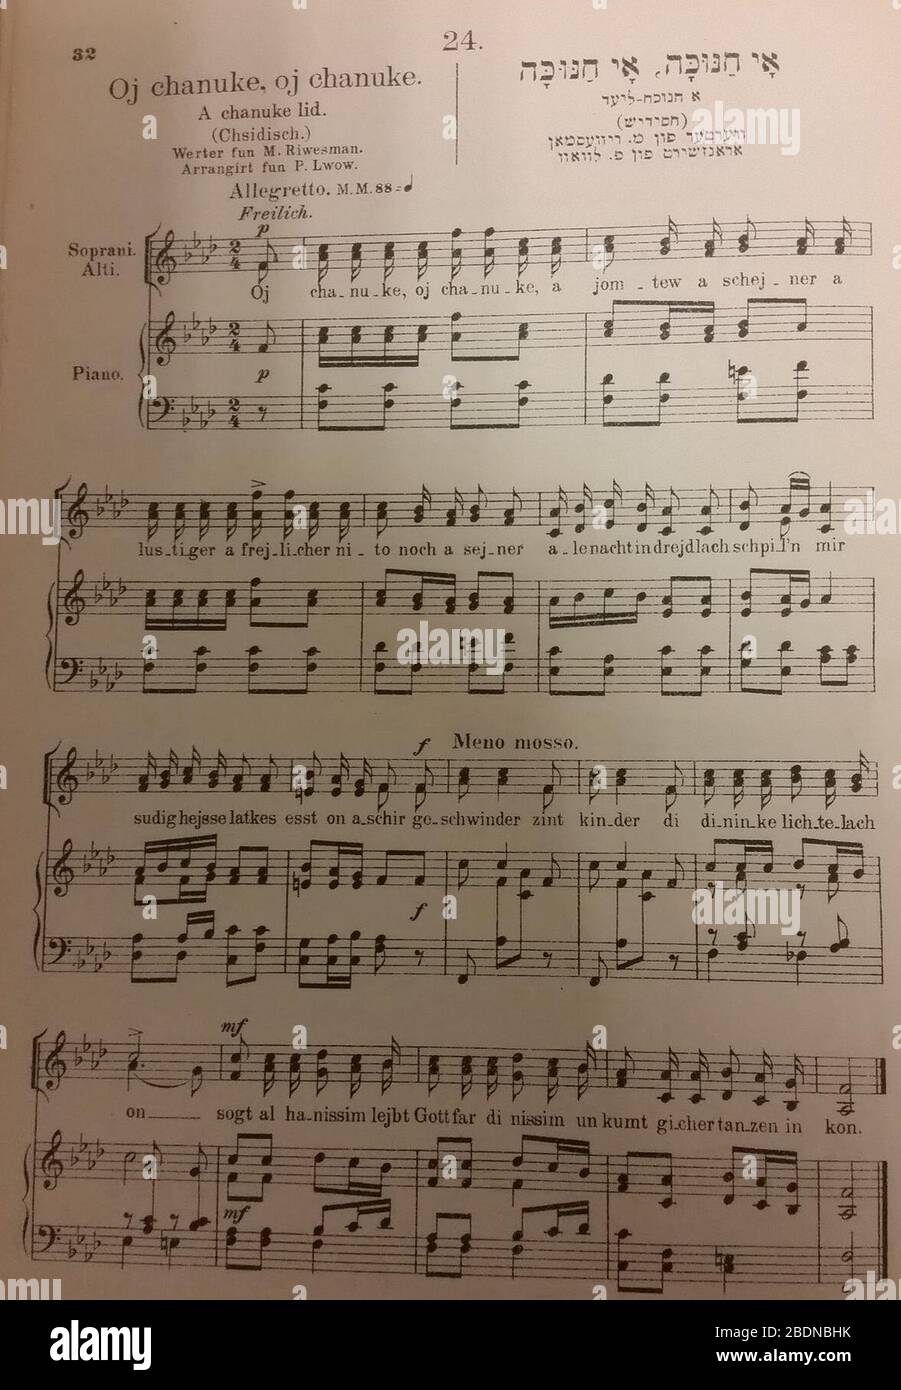 Archival Music Sheet Publication High Resolution Stock Photography And Images Alamy